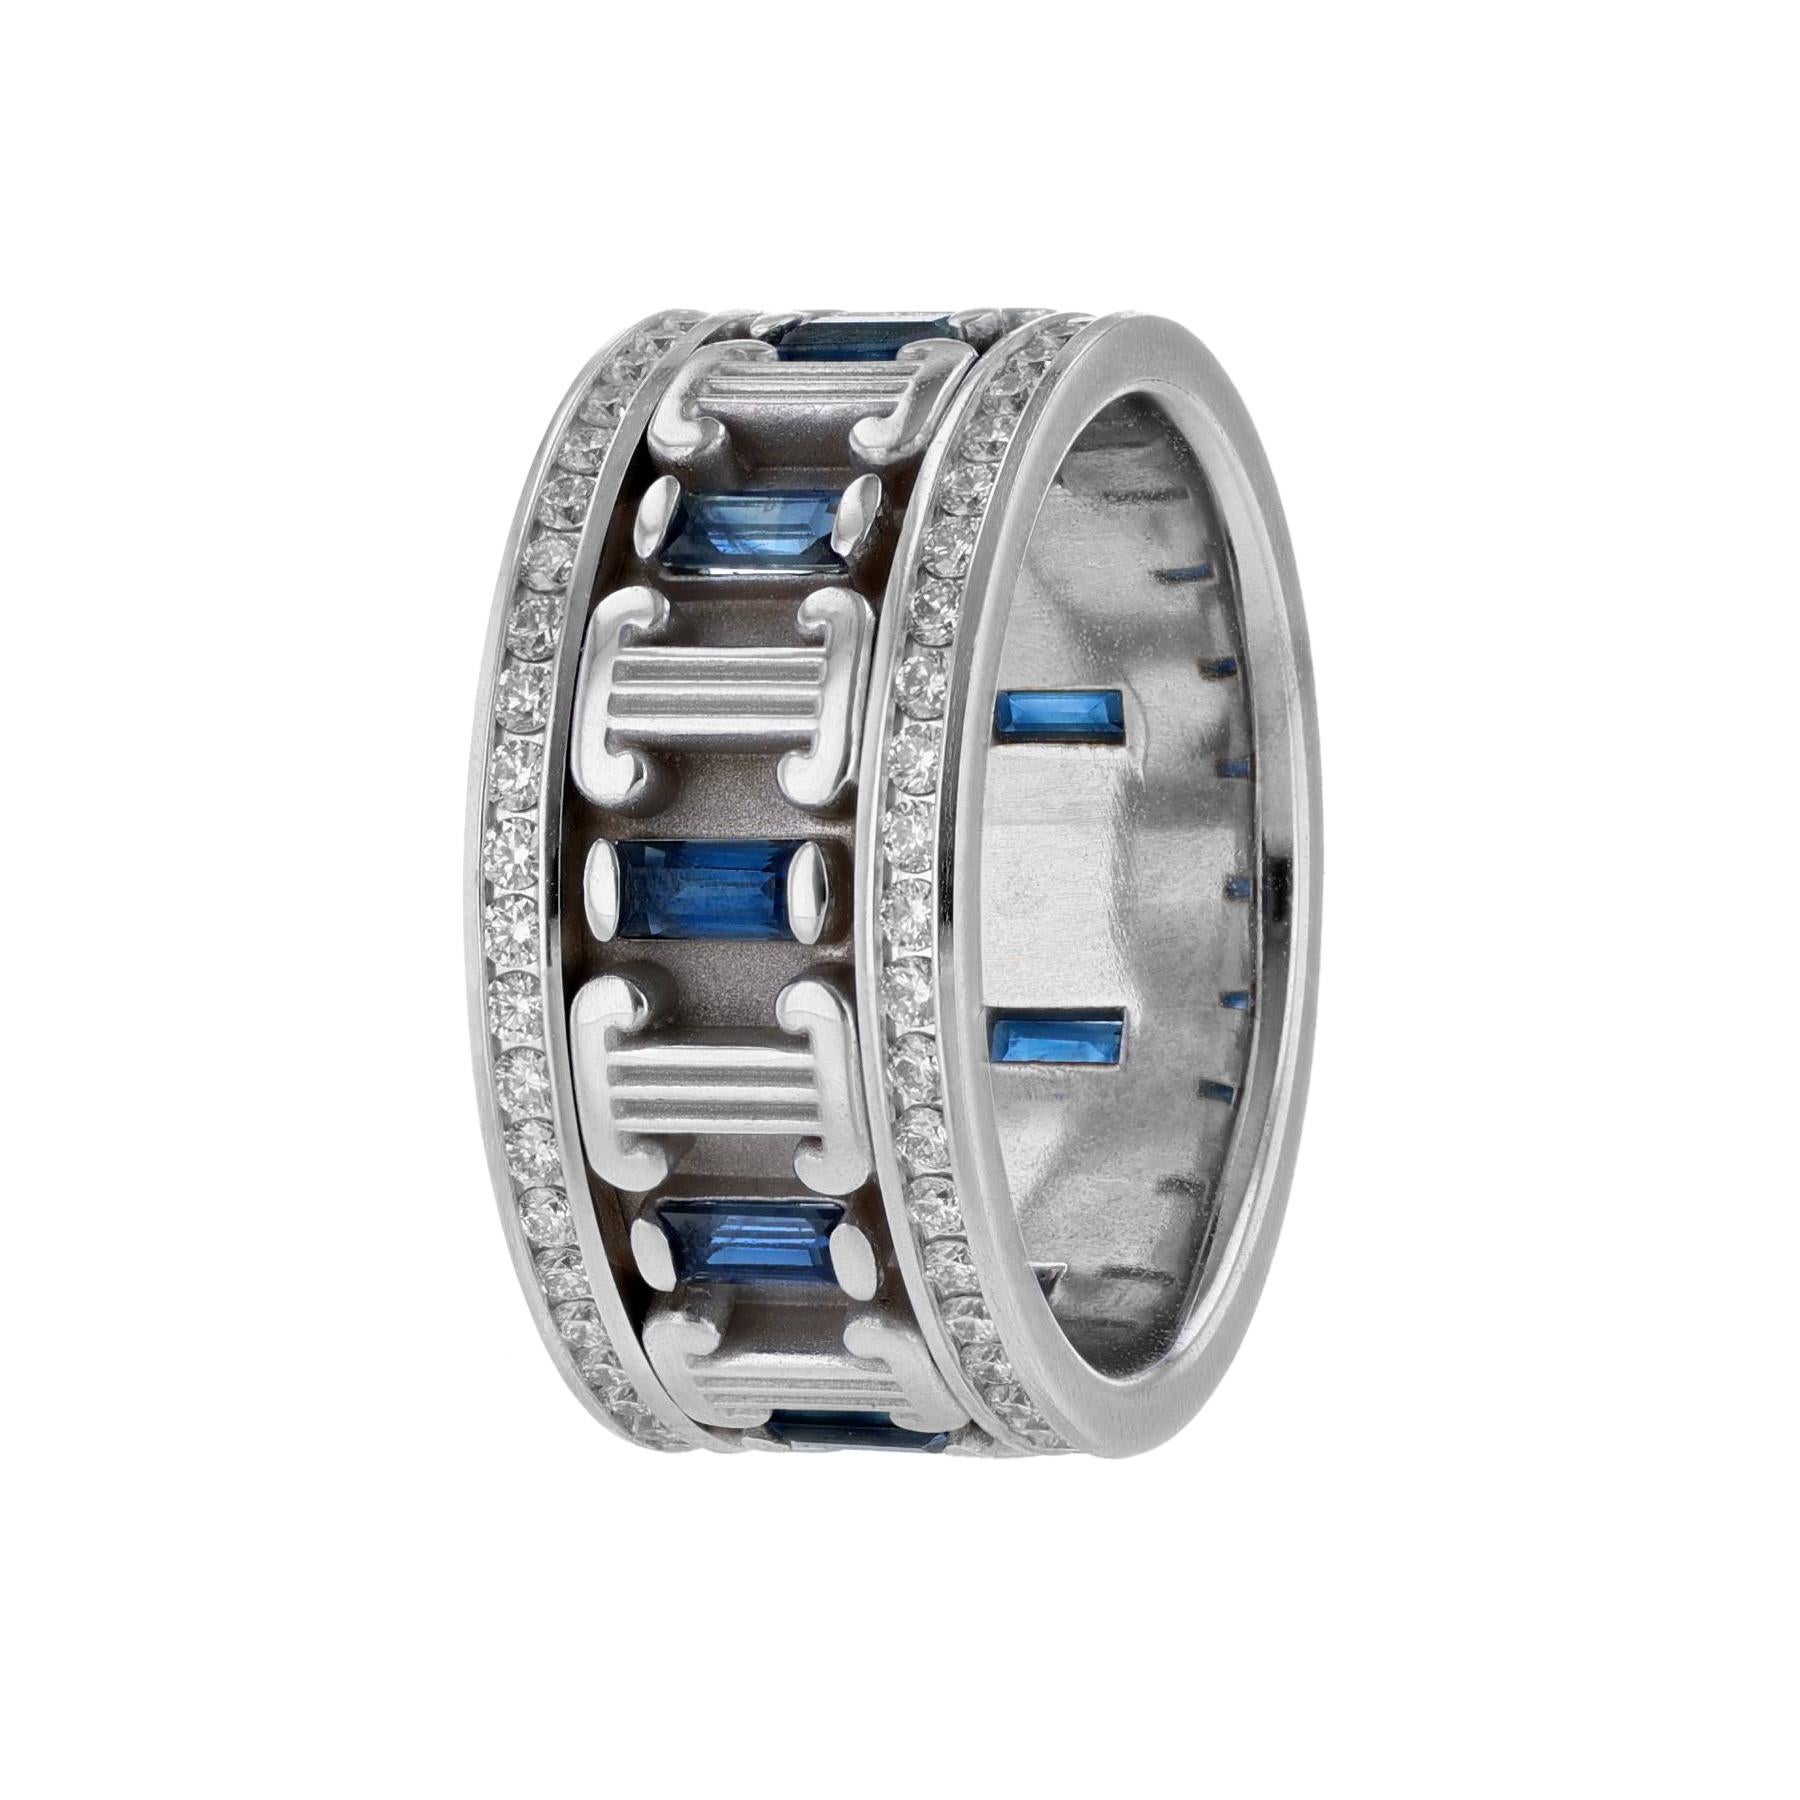 This ring is made in 14K white gold and features 9 emerald cut blue sapphires weighing 1.40 carats. It also features 2 rows of 92 round cut diamonds weighing 1.13 carats.  With a color grade (H) and clarity grade (VS). All stones are channel set.